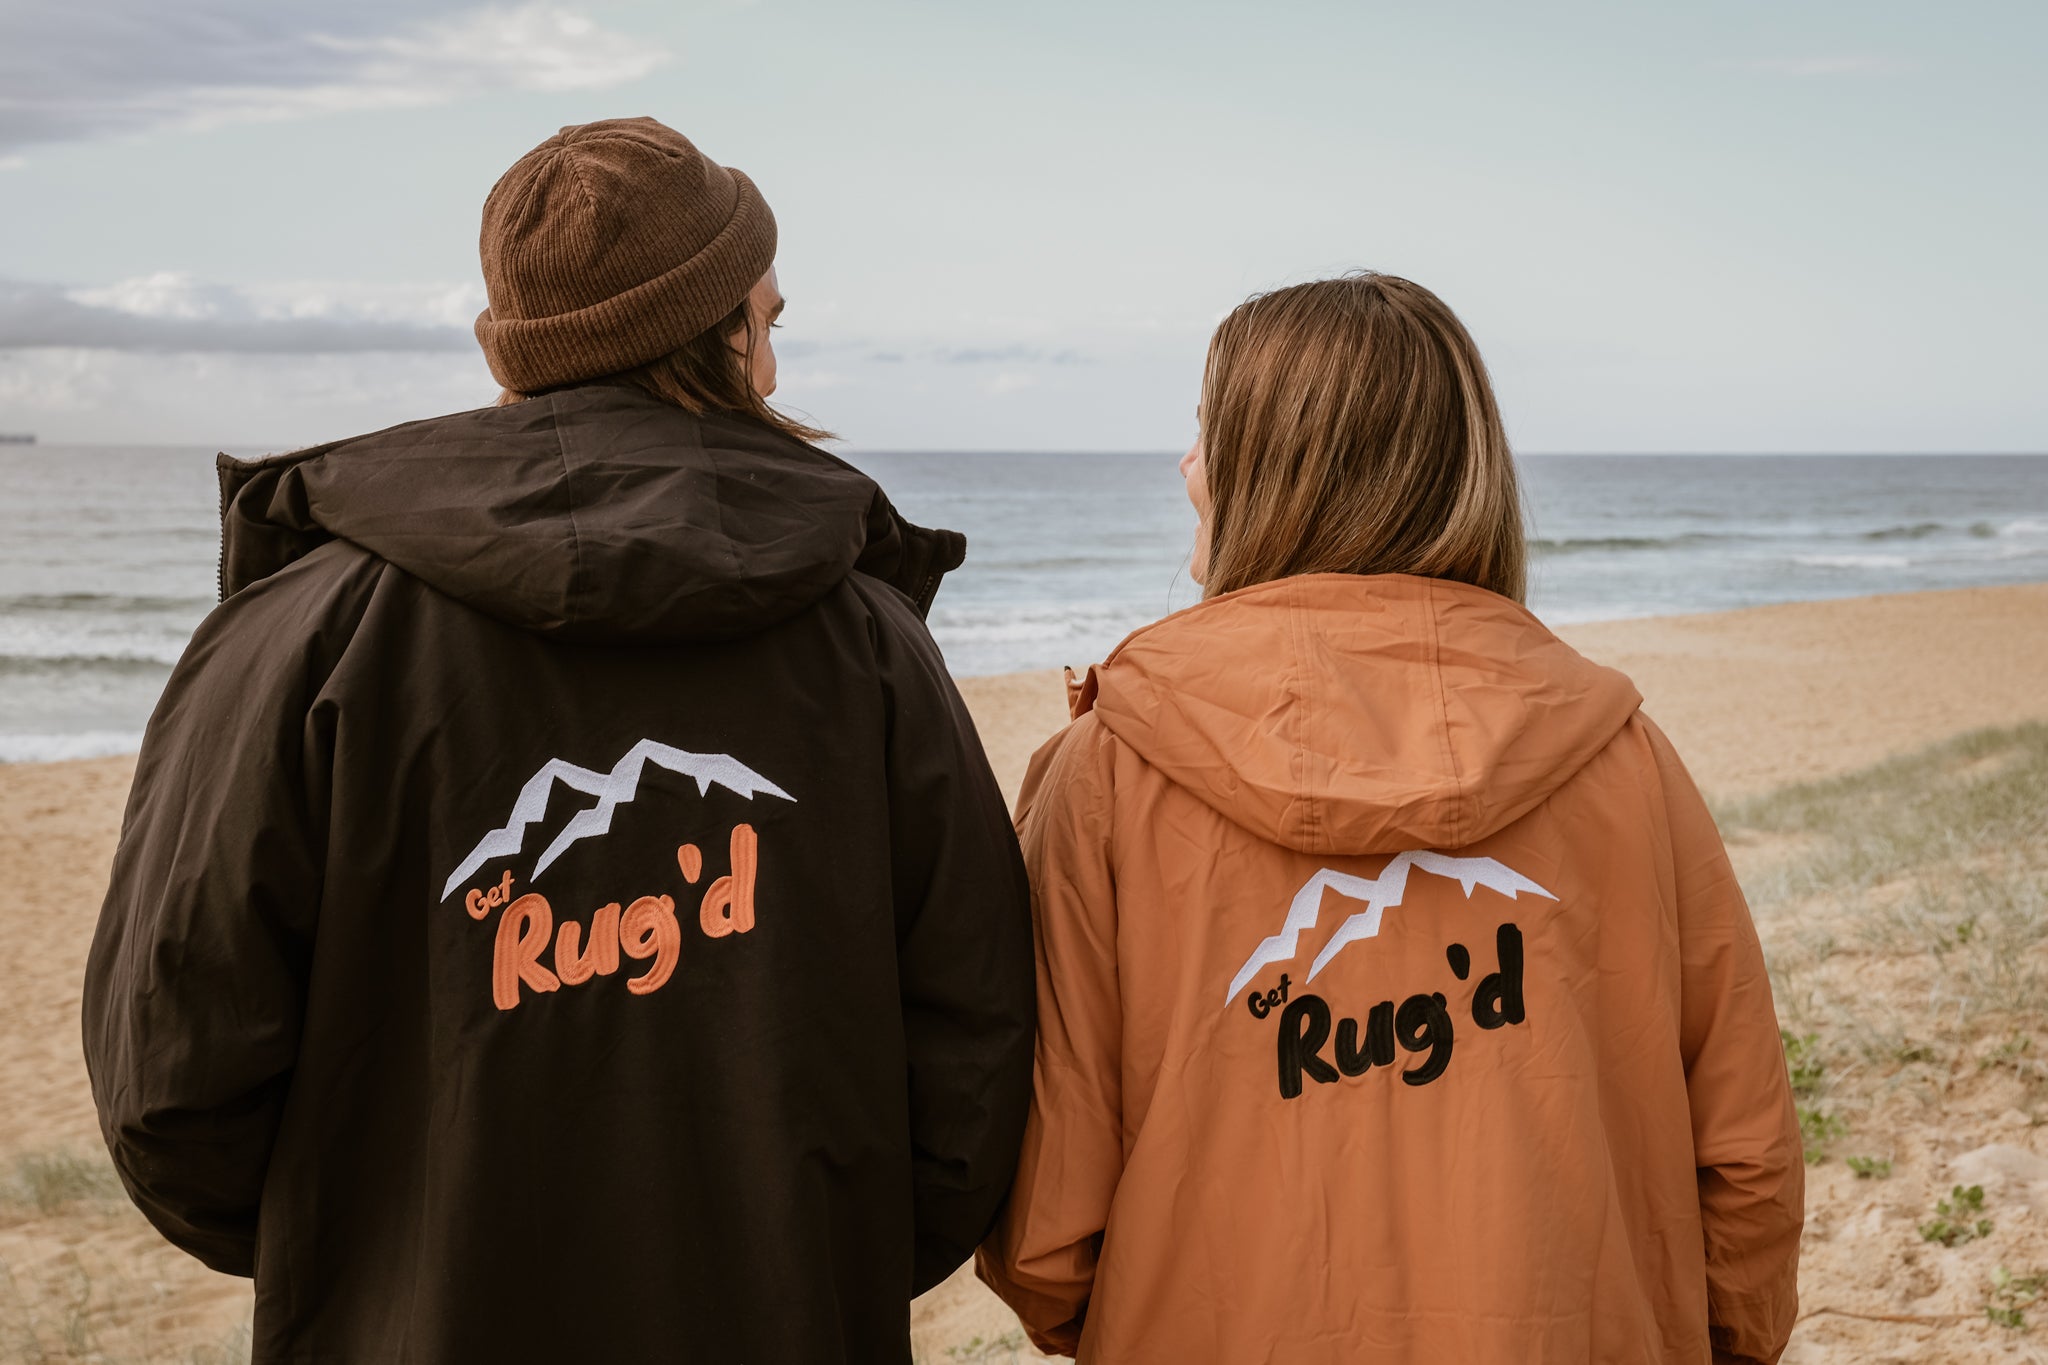 get rugd hydrocloak jacket changing robe camping explore adventure vanlife surfing about us